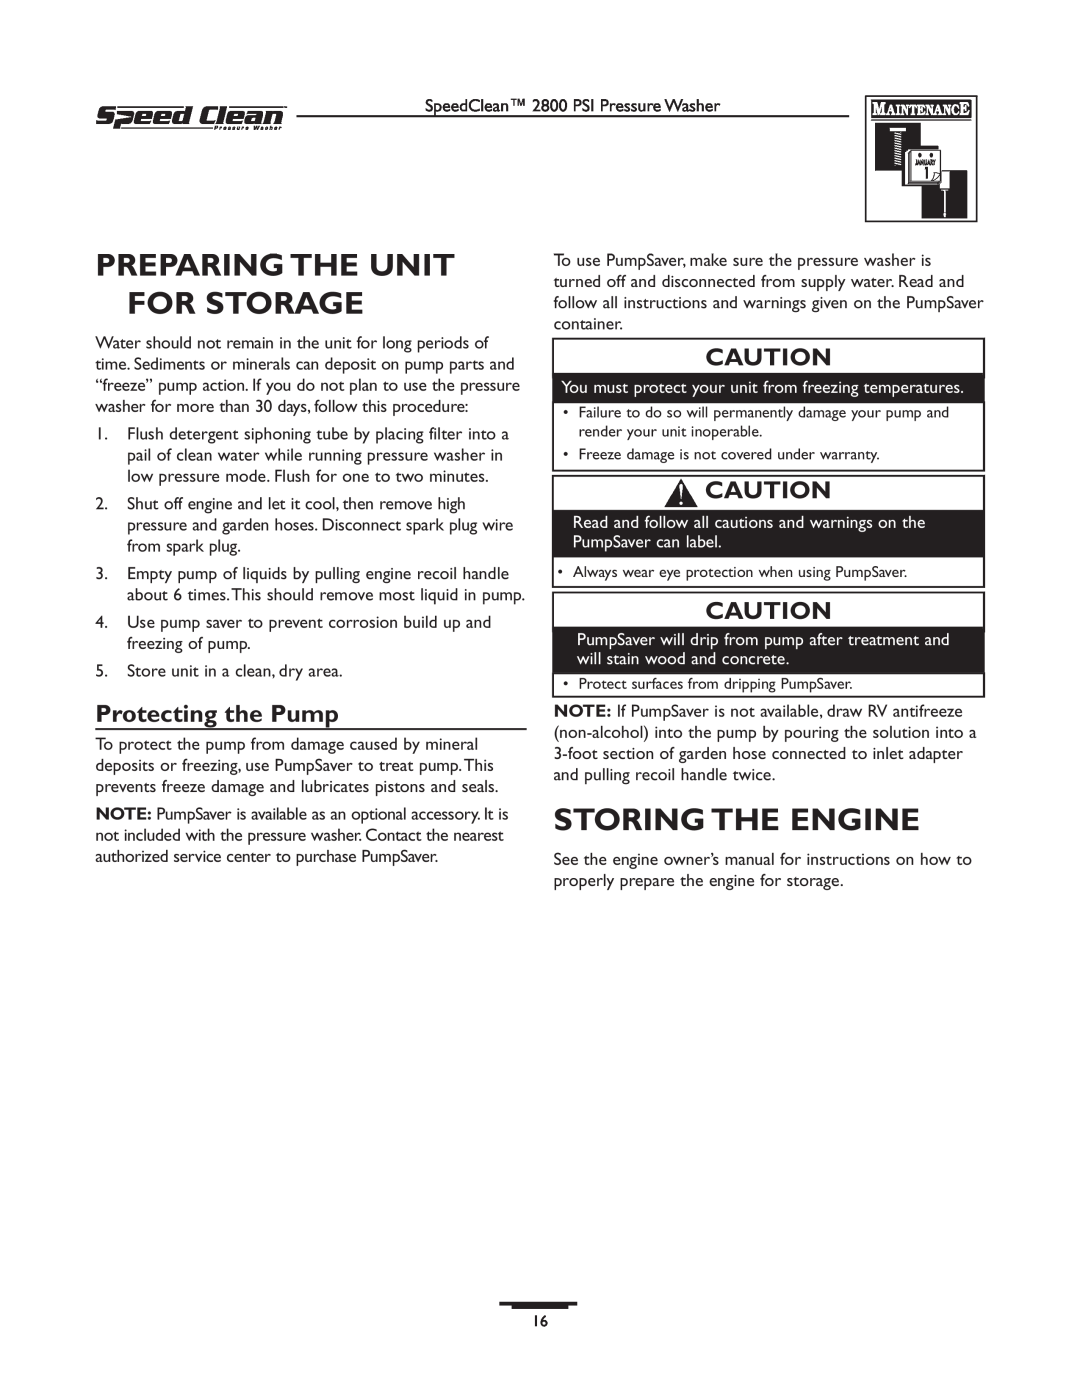 Briggs & Stratton 020212-0 owner manual Preparing The Unit For Storage, Storing The Engine, Protecting the Pump 